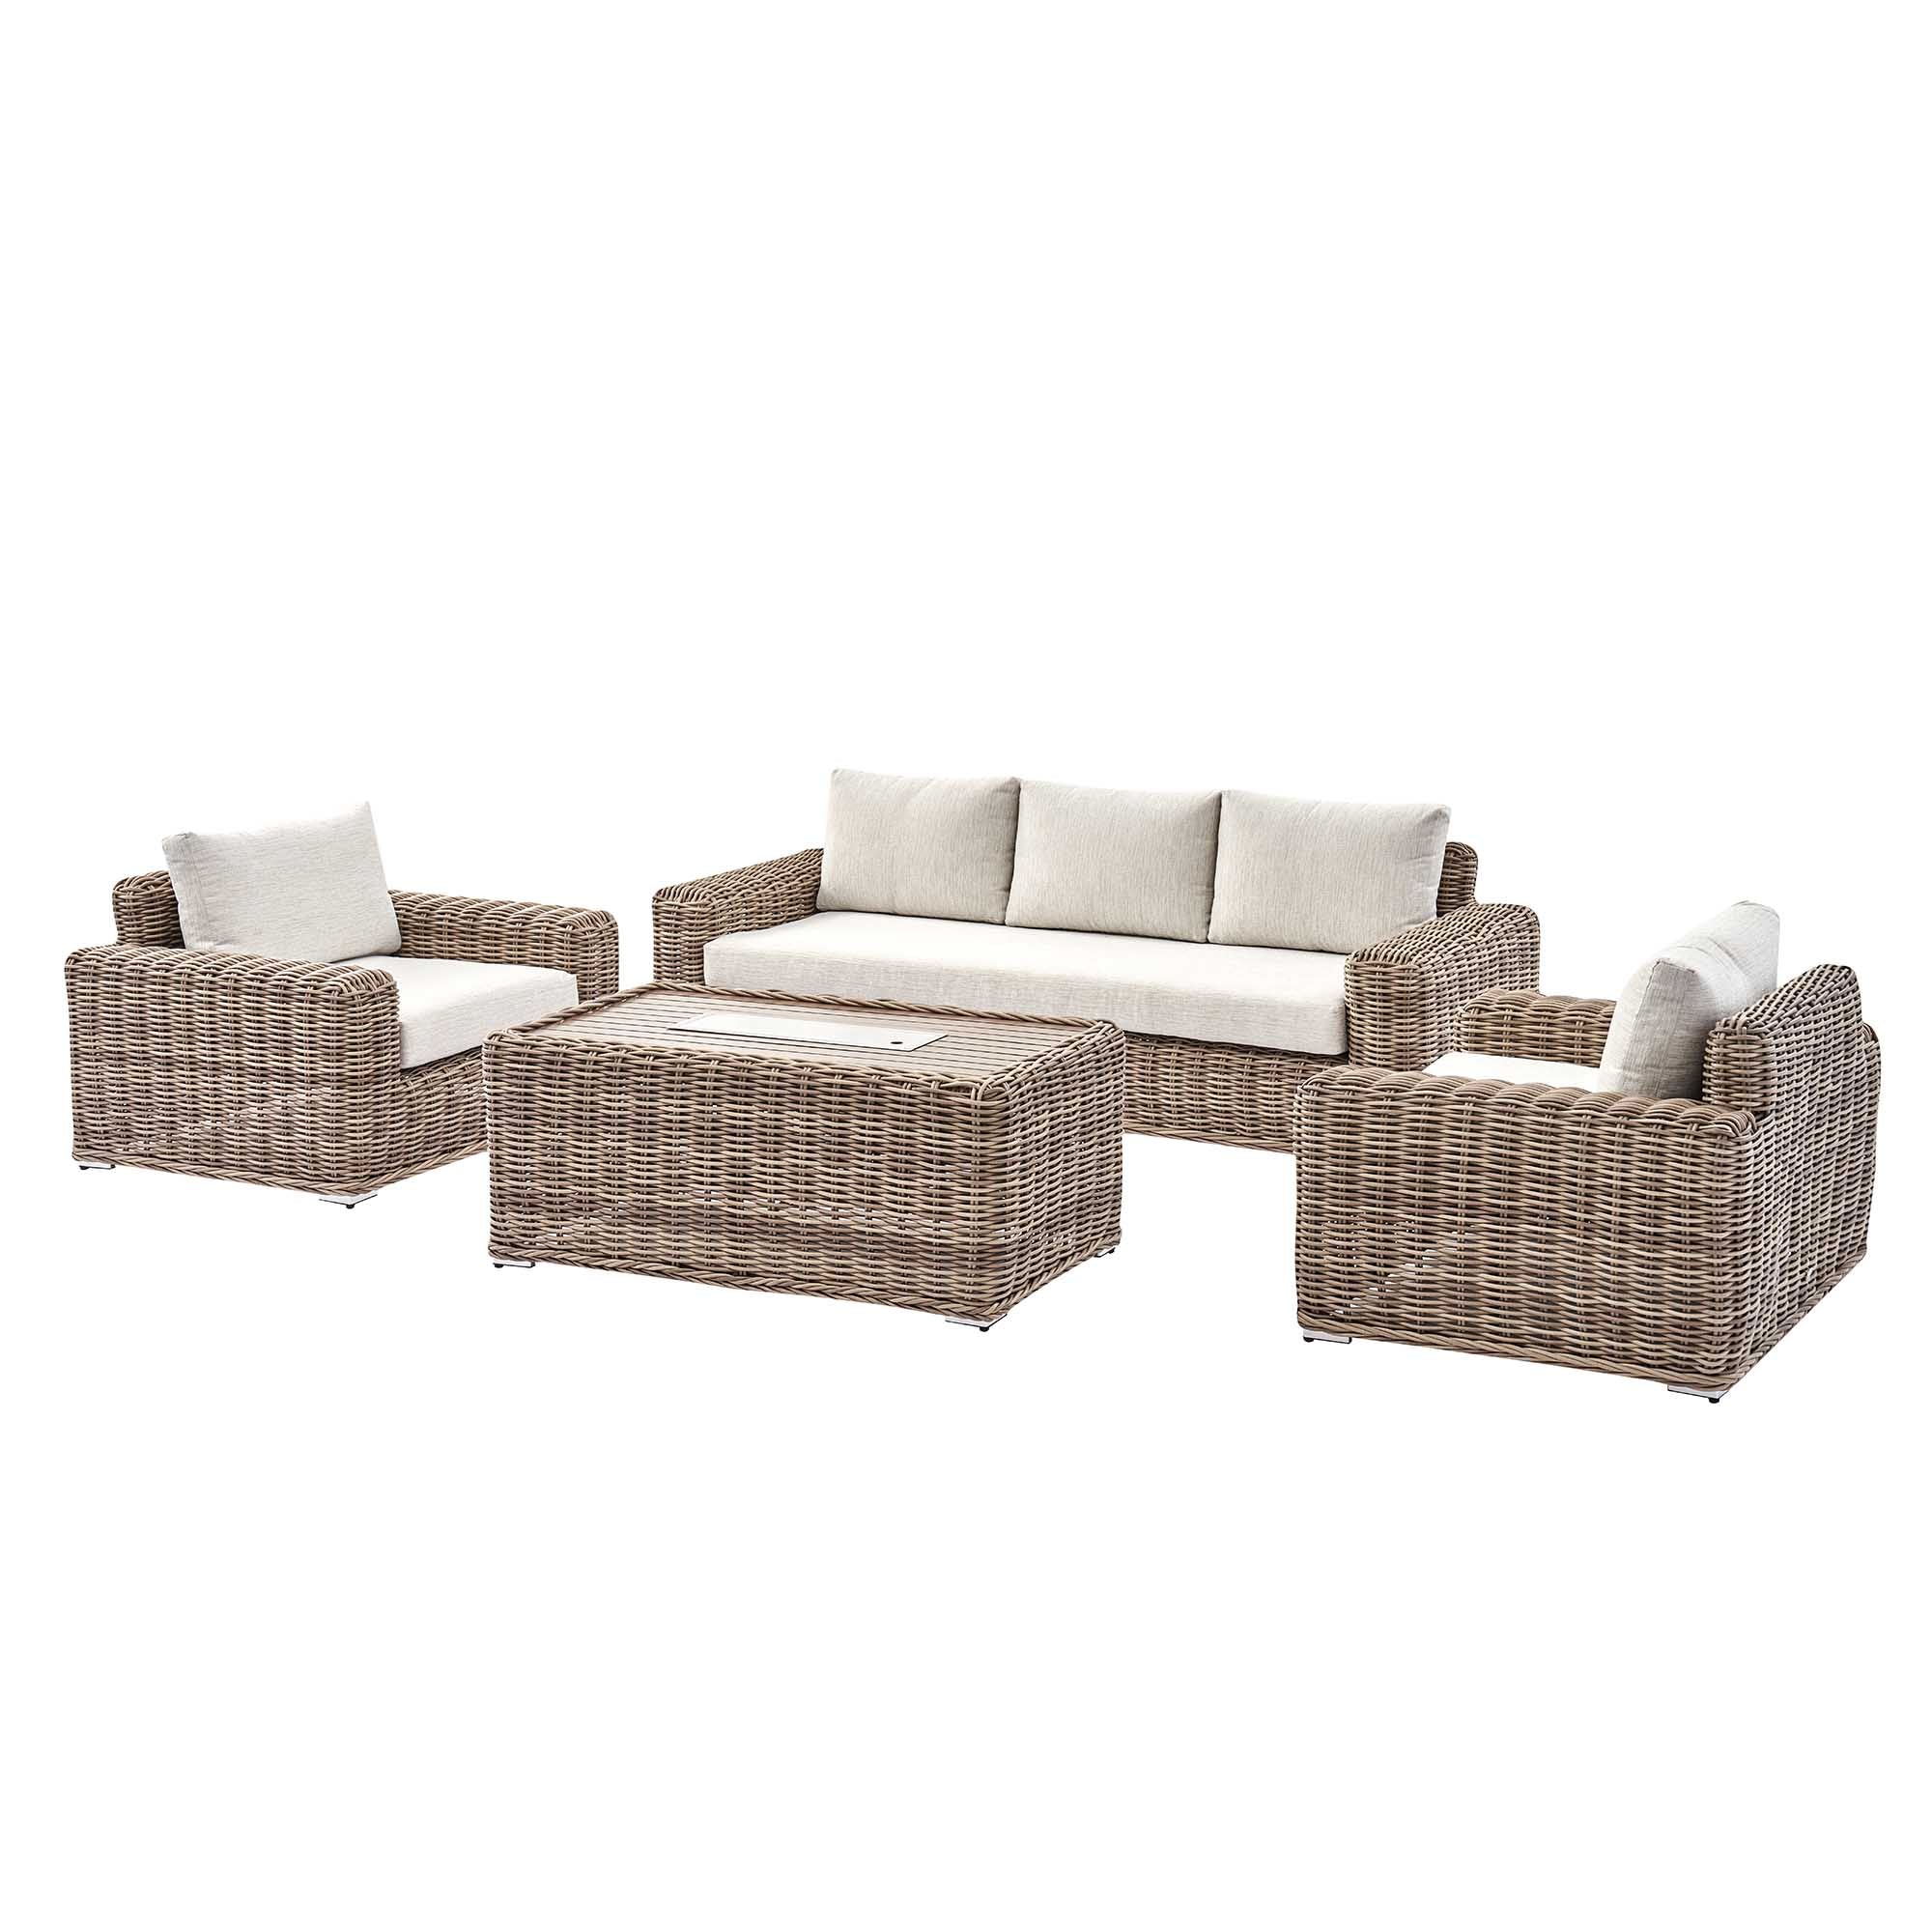 Bellagio Round Wicker Sofa Set with Firepit Coffee Table, Natural